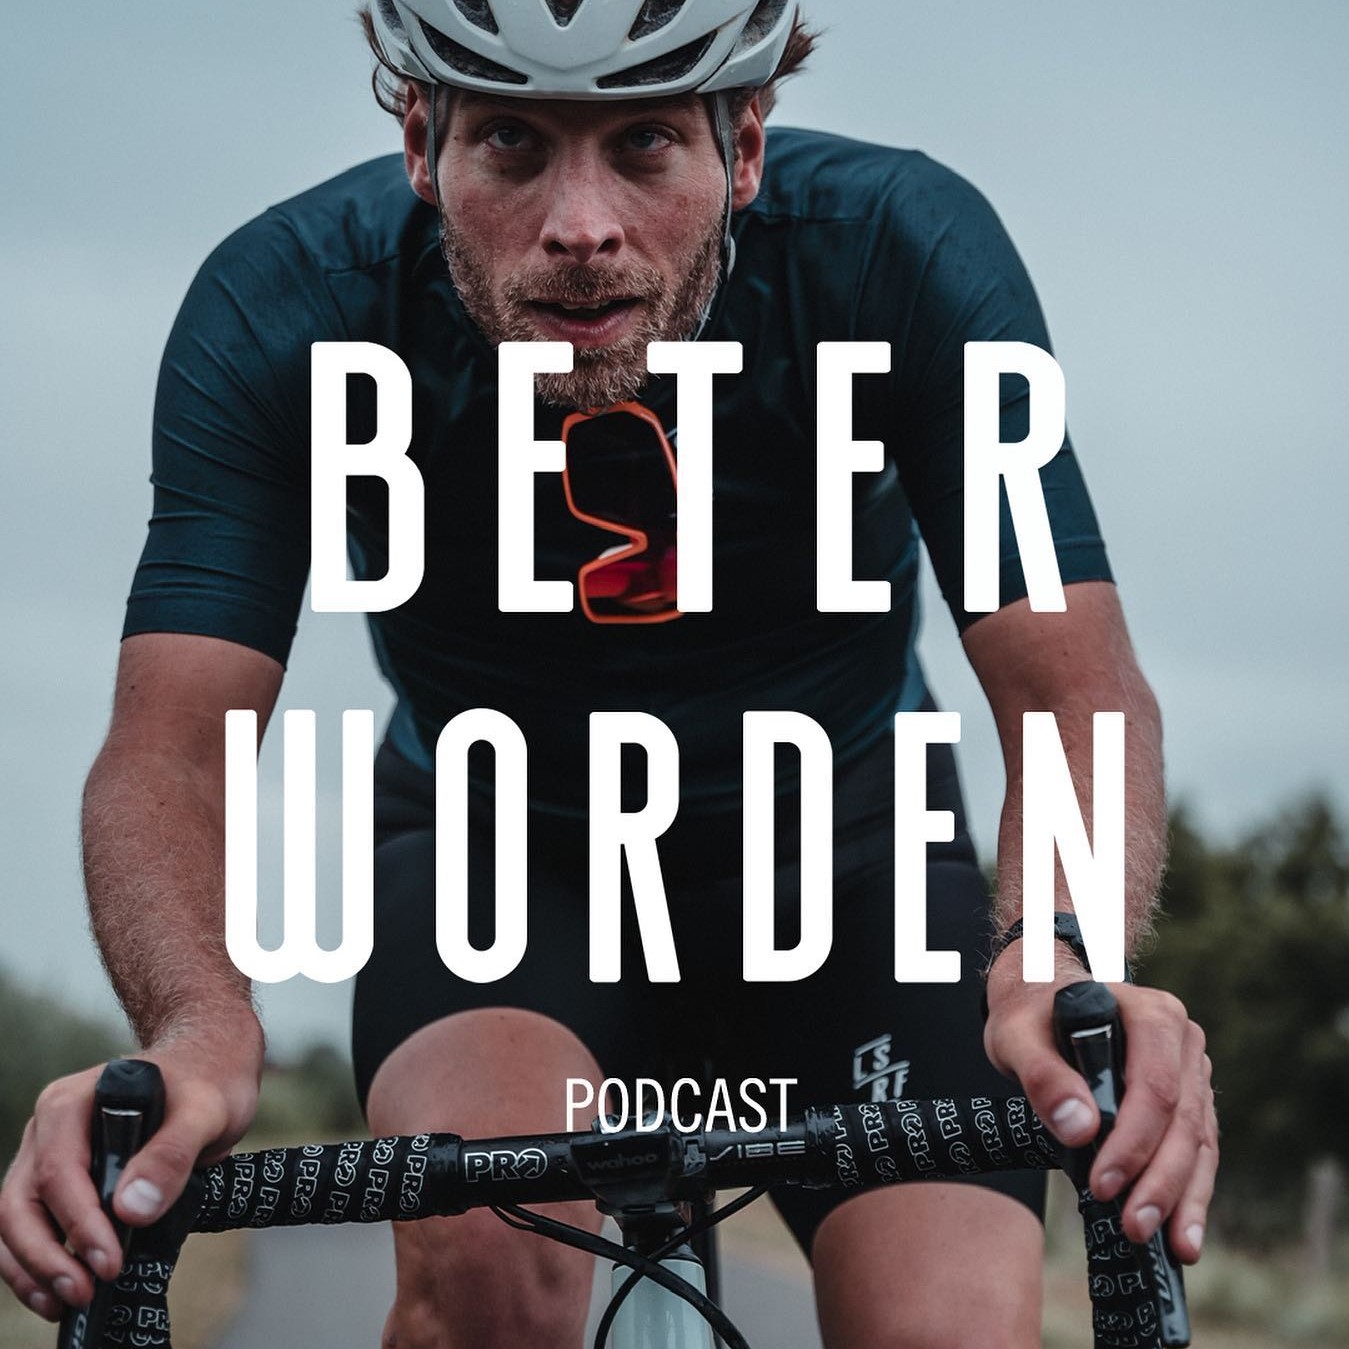 Beter Worden Podcast 79 - Pacing - JOIN Cycling